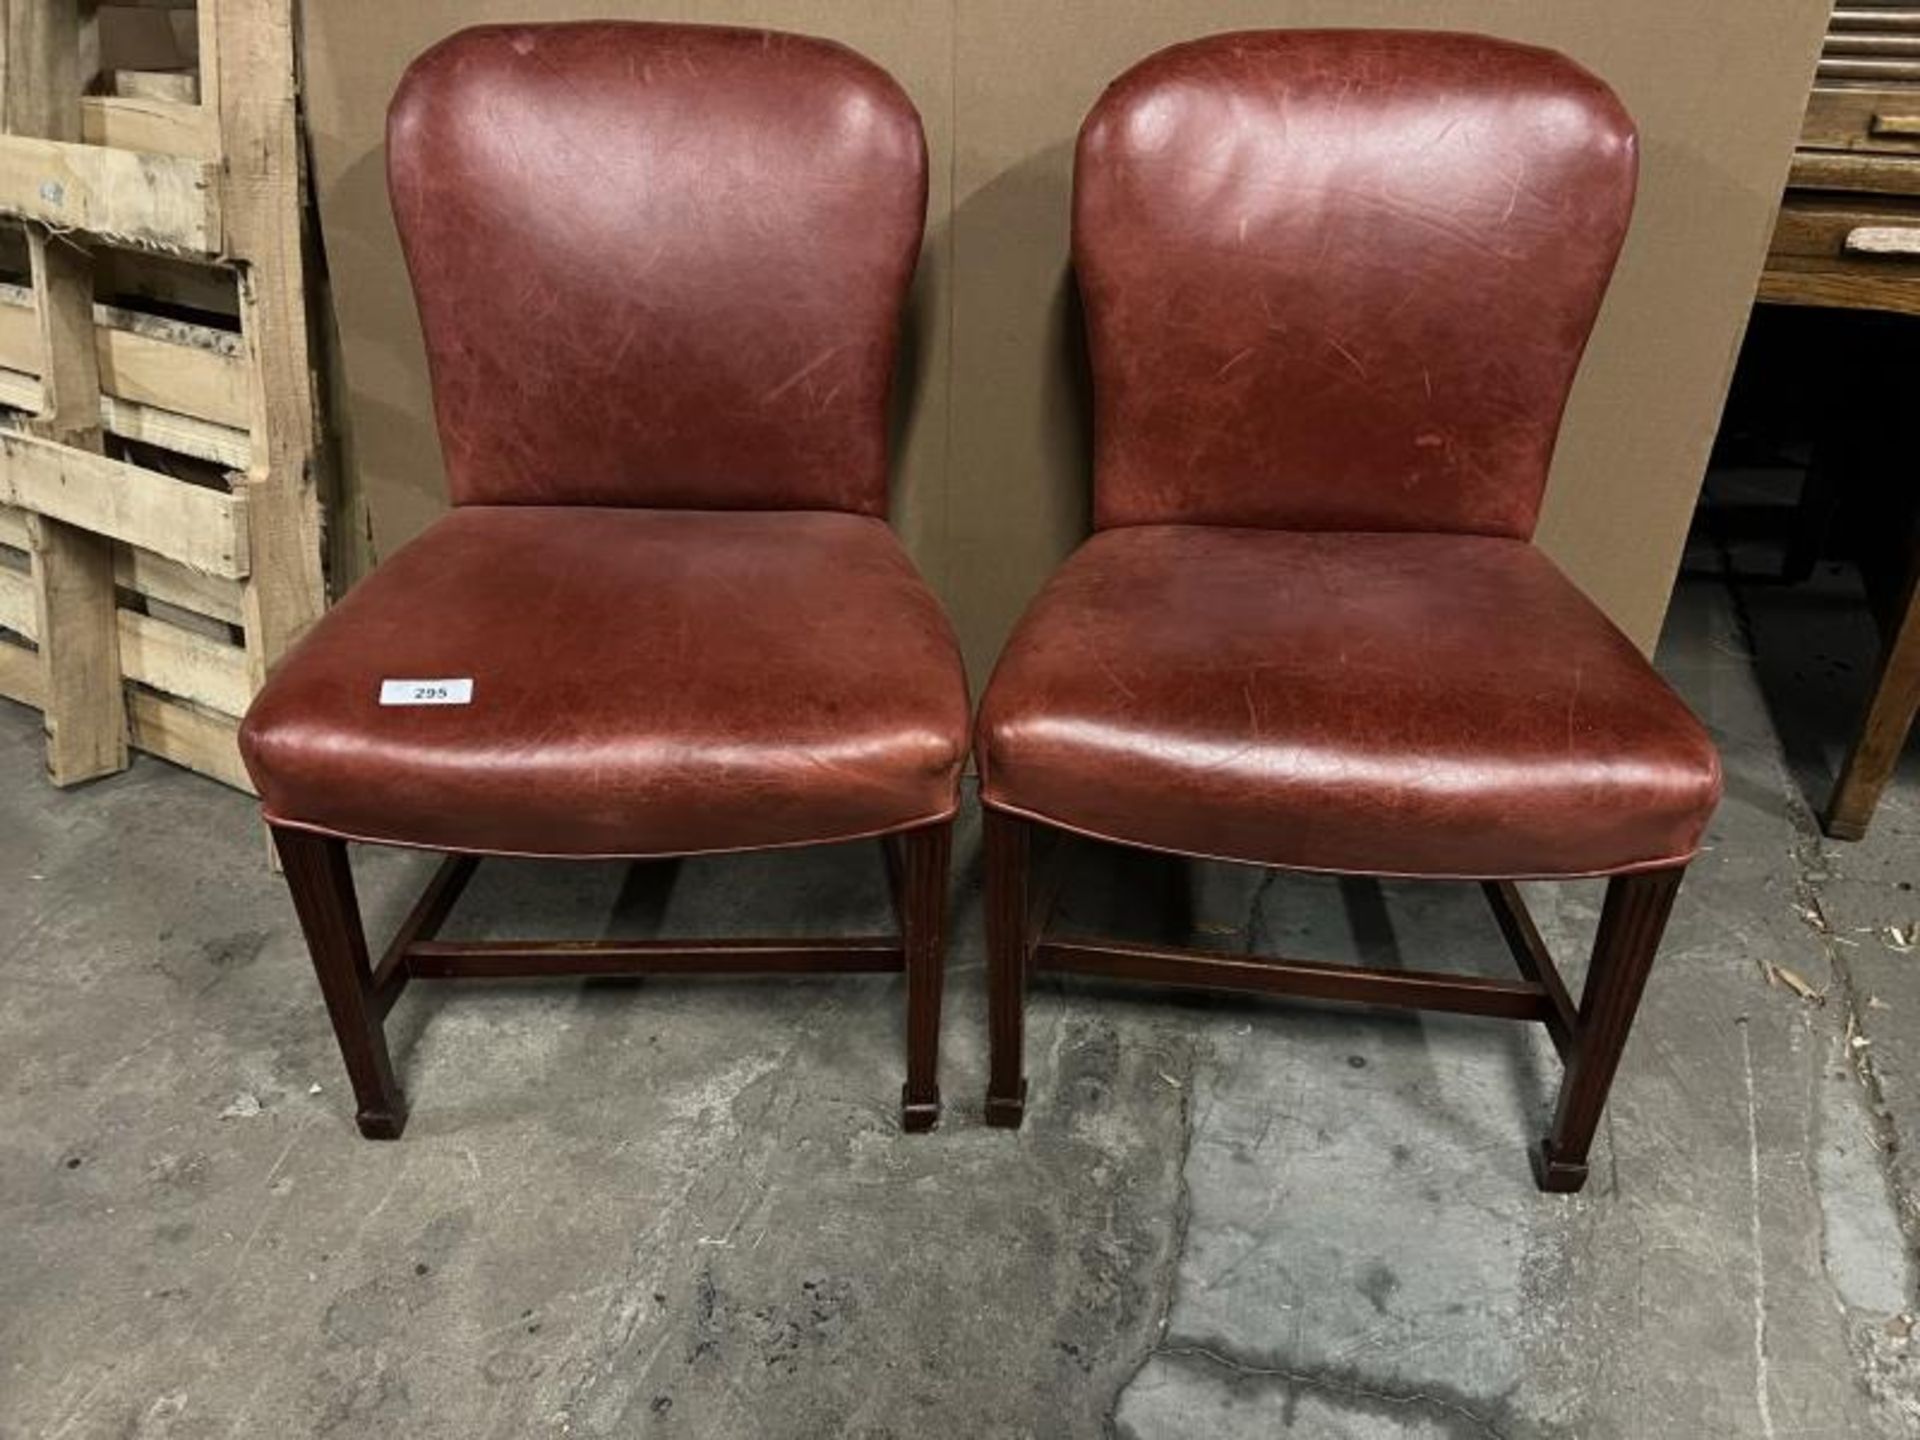 Pair of Red Vinyl Chairs; Located in Mill Building - Image 2 of 20